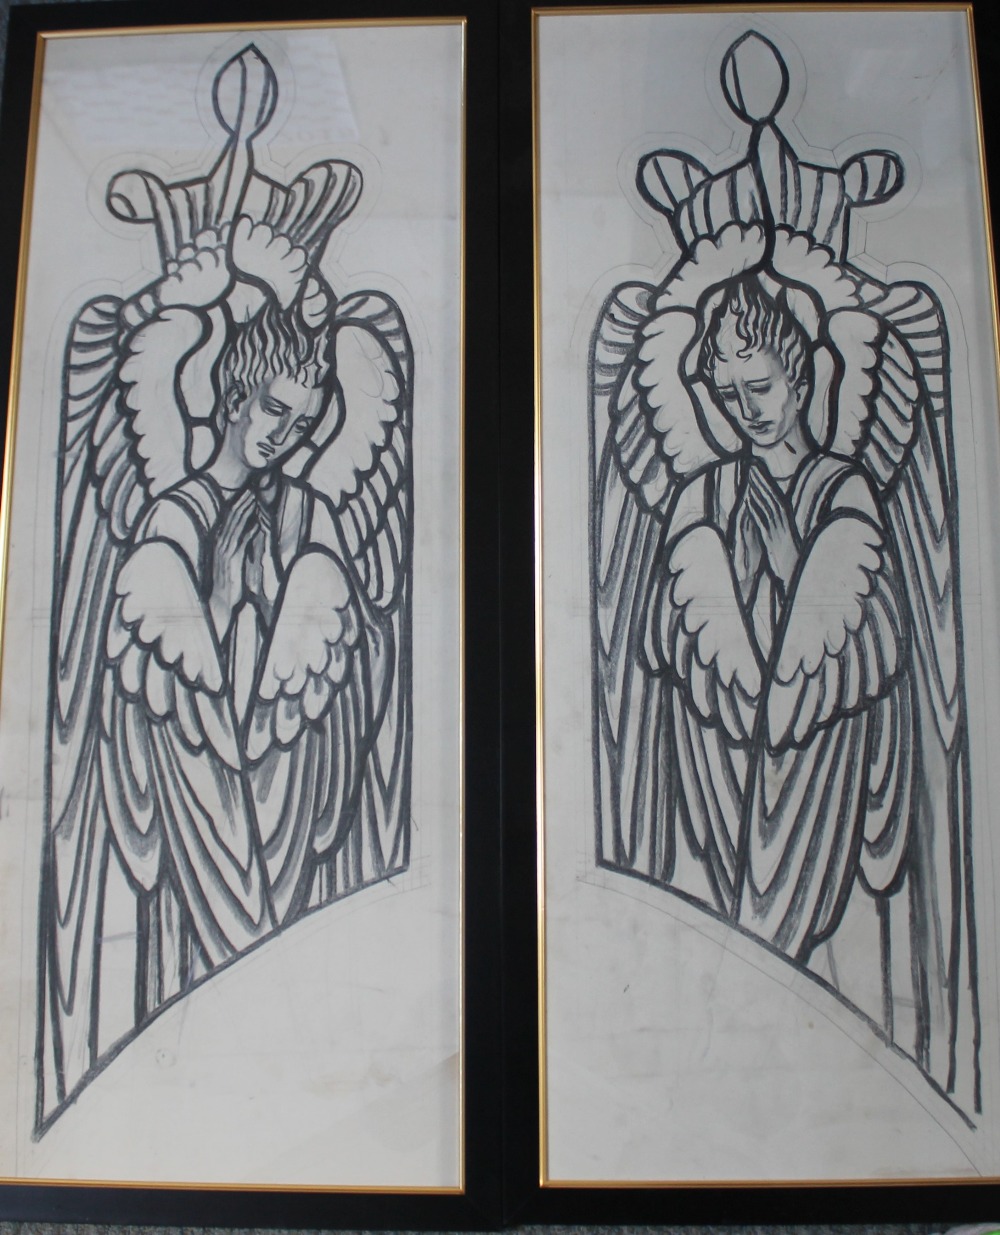 A PAIR OF STAINED GLASS WINDOW DESIGNS FROM THE HARDMAN STUDIO, studies of Angels, unsigned,